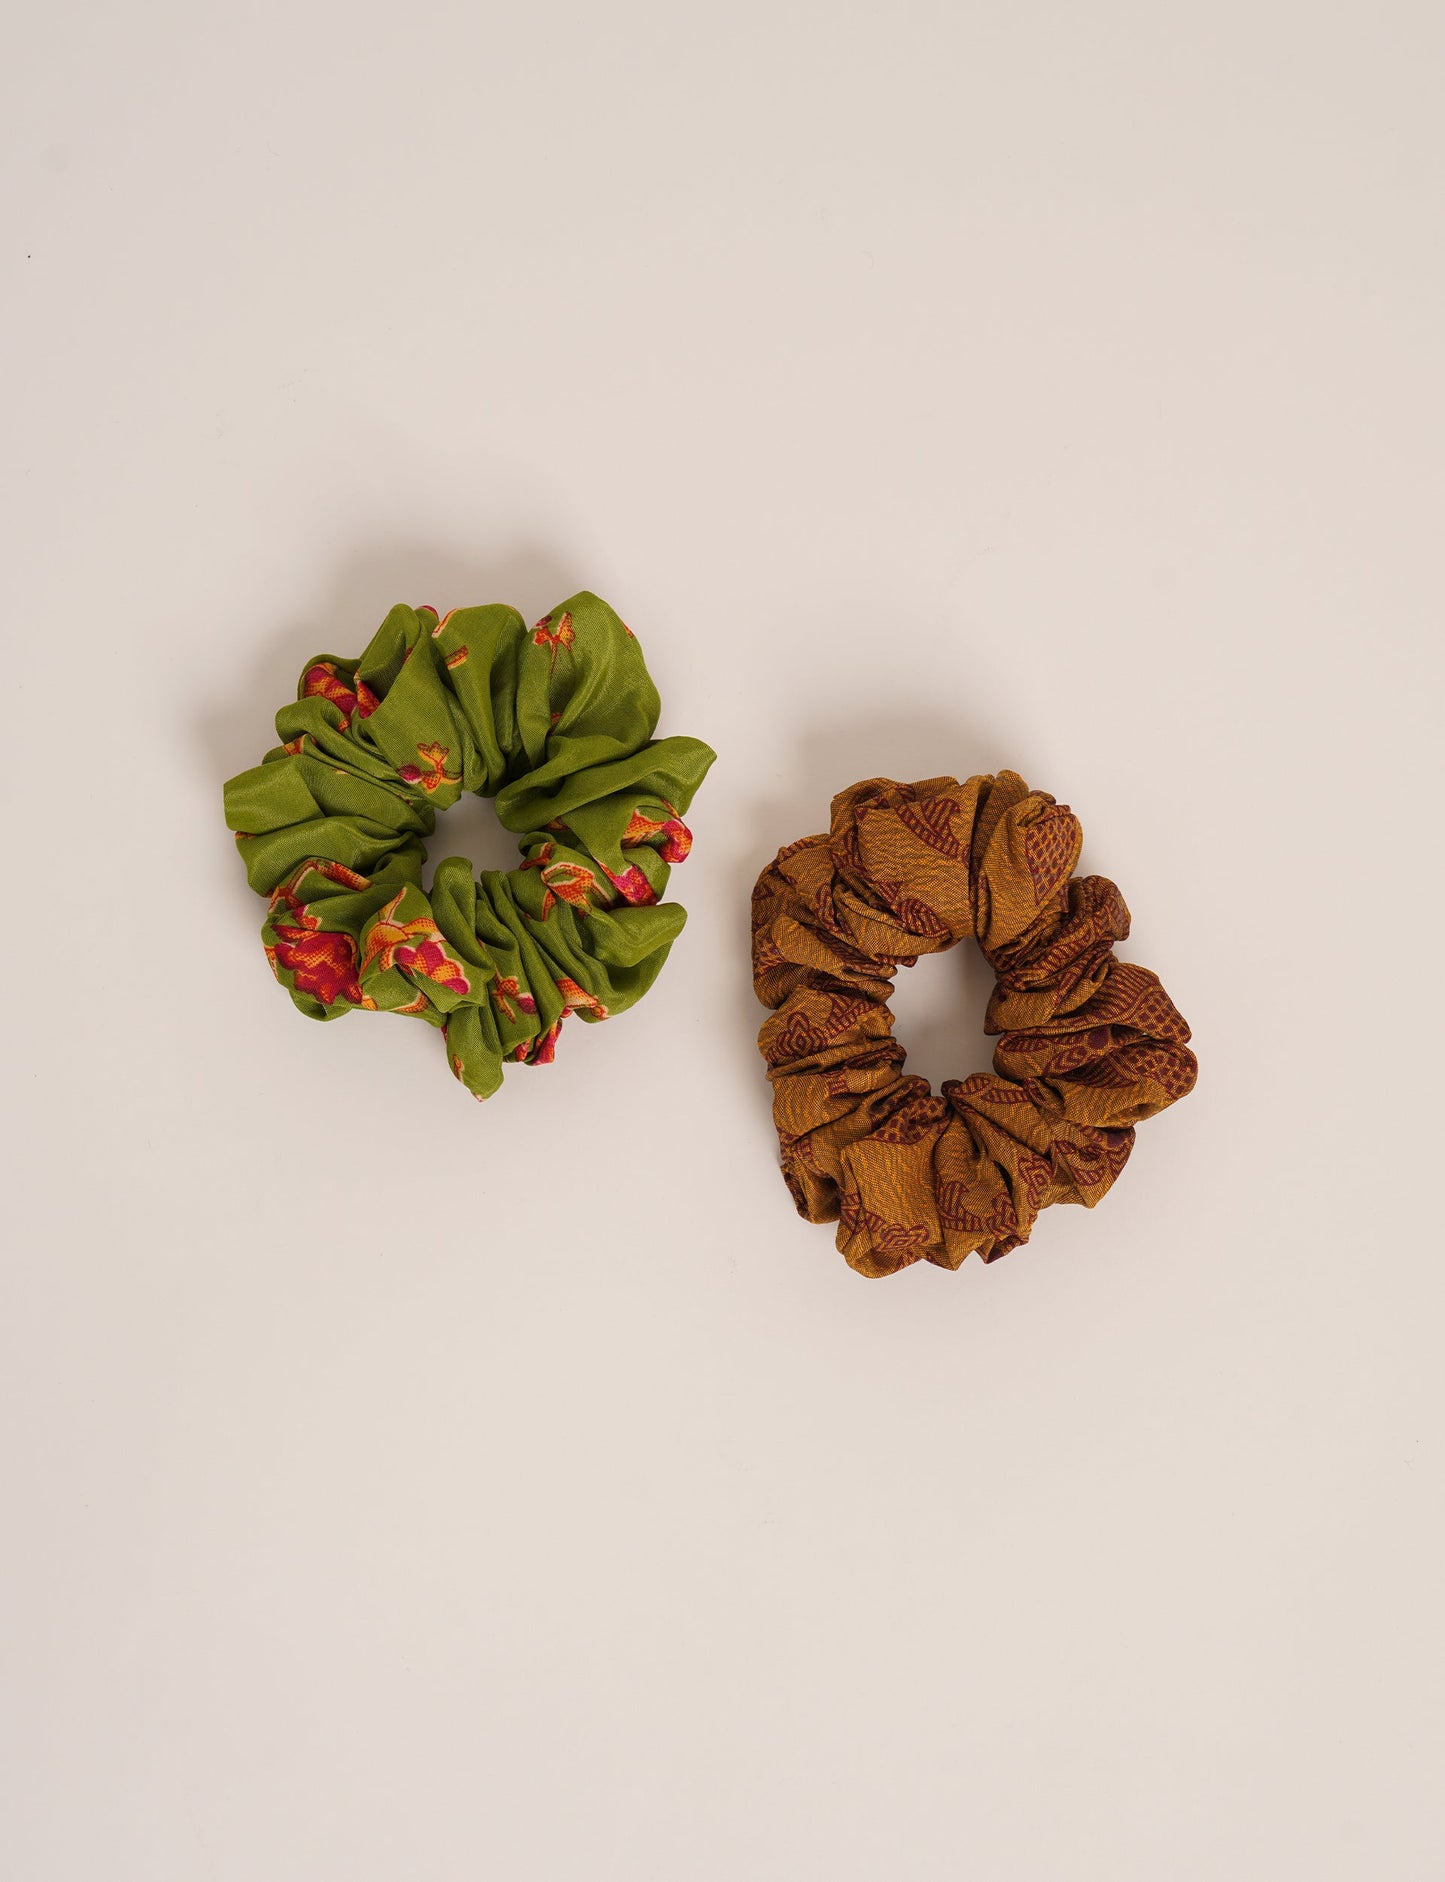 Upgrade your hairstyle with our Scrunchy Set of 2 – elastic hair ties wrapped in colorful Indian sari fabric. A top pick in ethical and green fashion, these eco-friendly prints add flair to your wrist and hair, making a sustainable style statement that catches attention and sparks change.